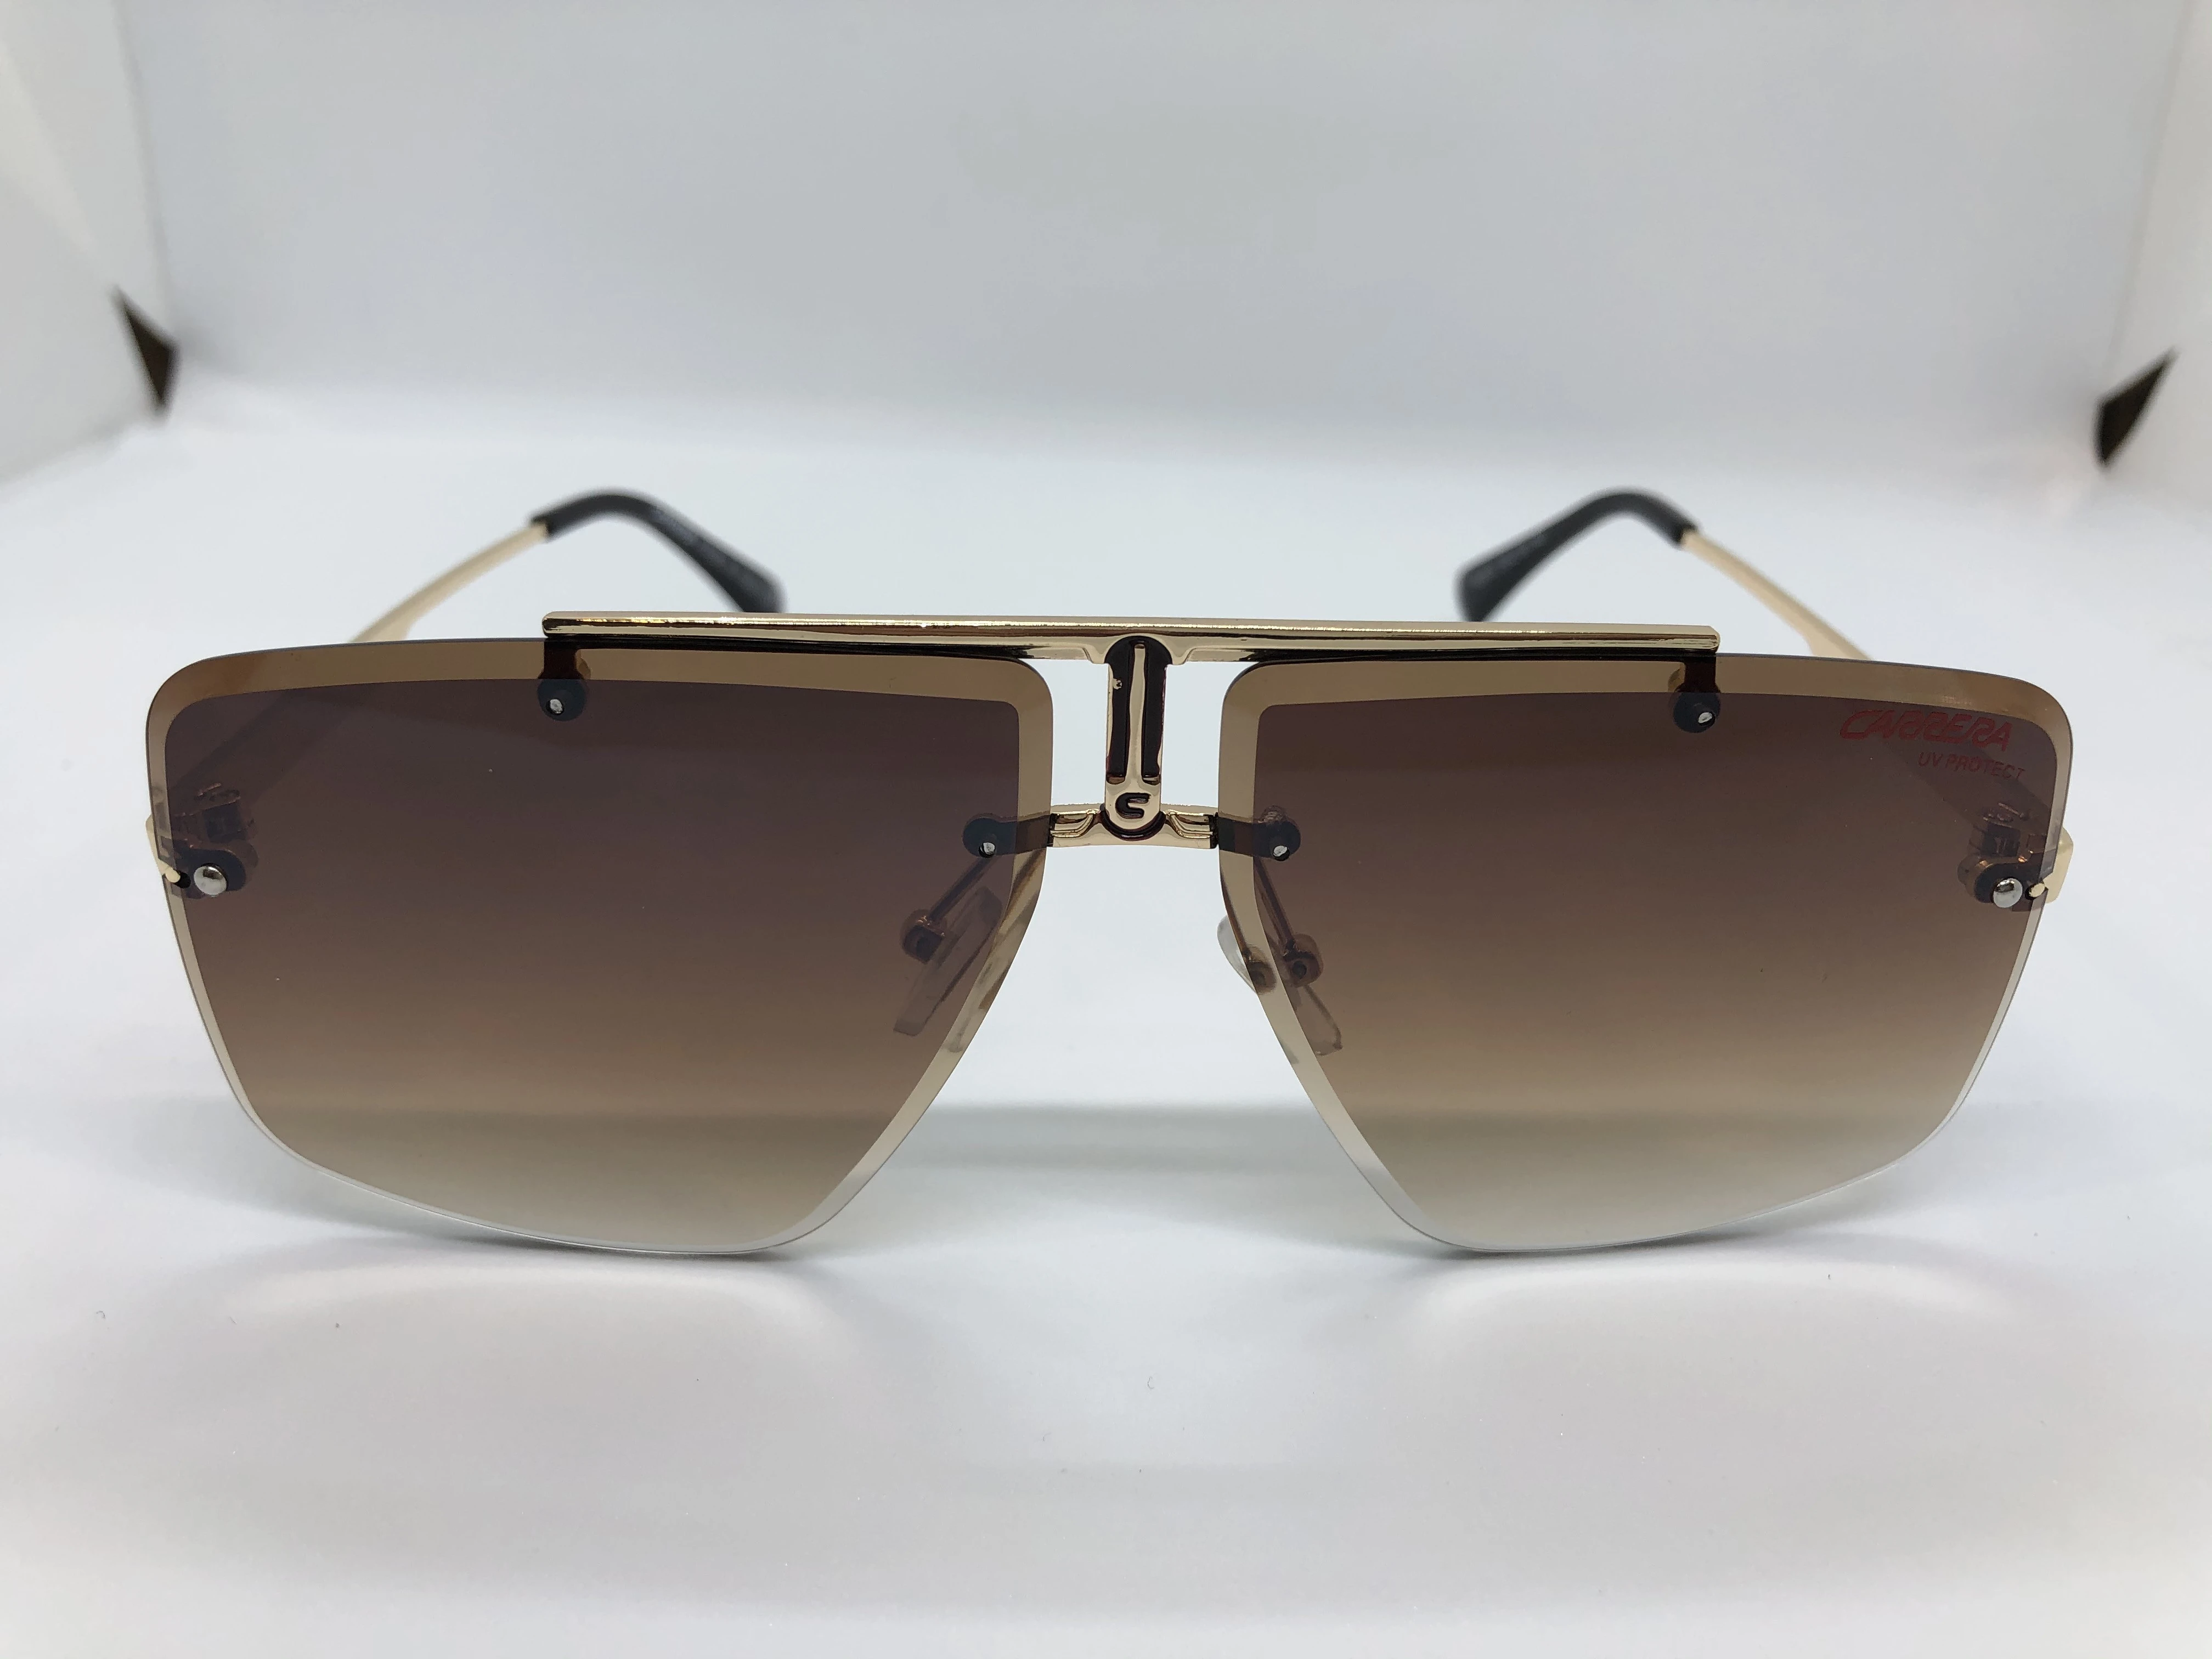 Sunglasses - from Carrera - without frame - light brown gradient lenses - golden metal arm - with engraved lenses